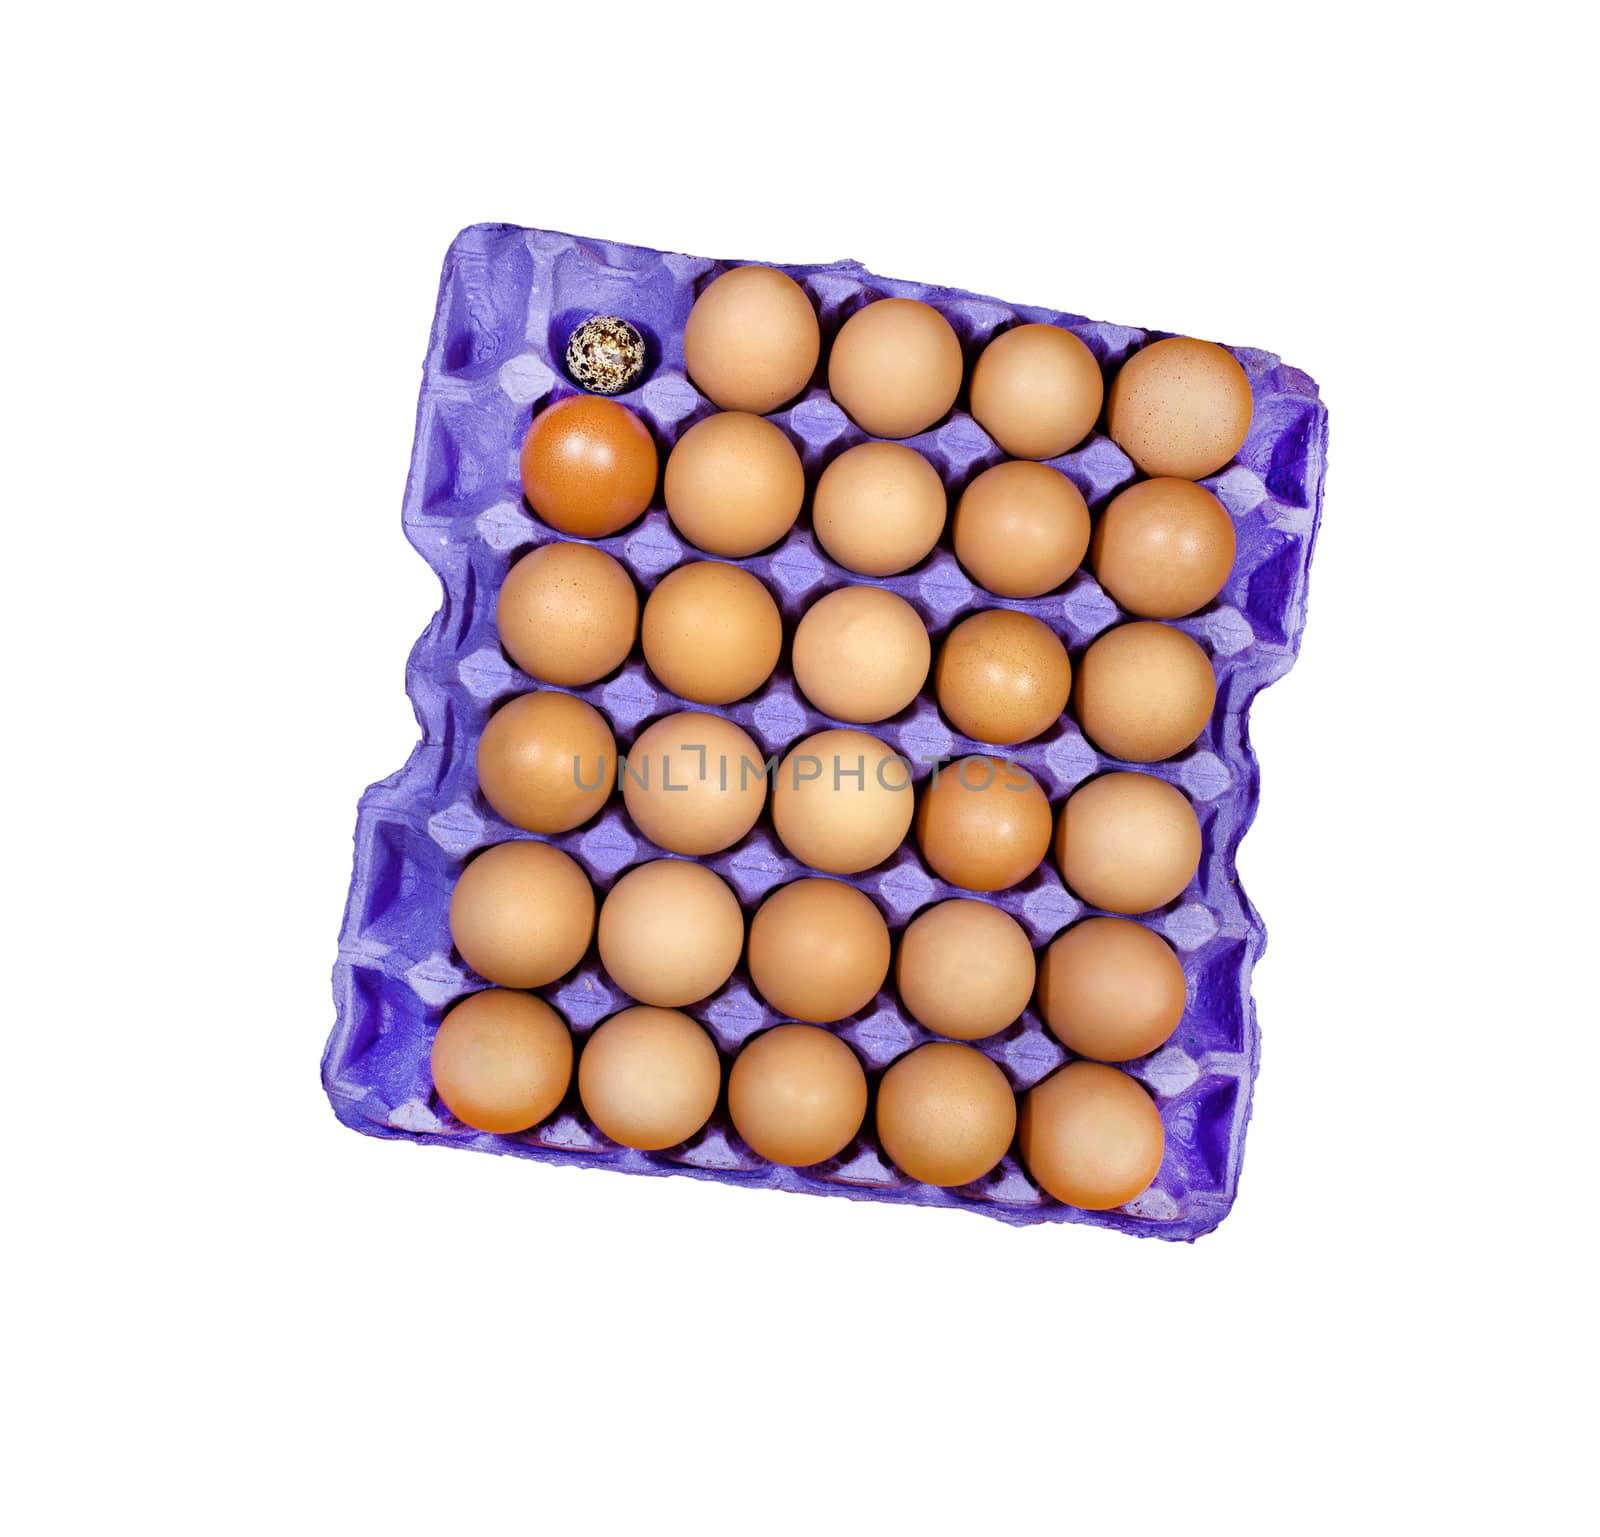 Quail egg tray of eggs on the white background